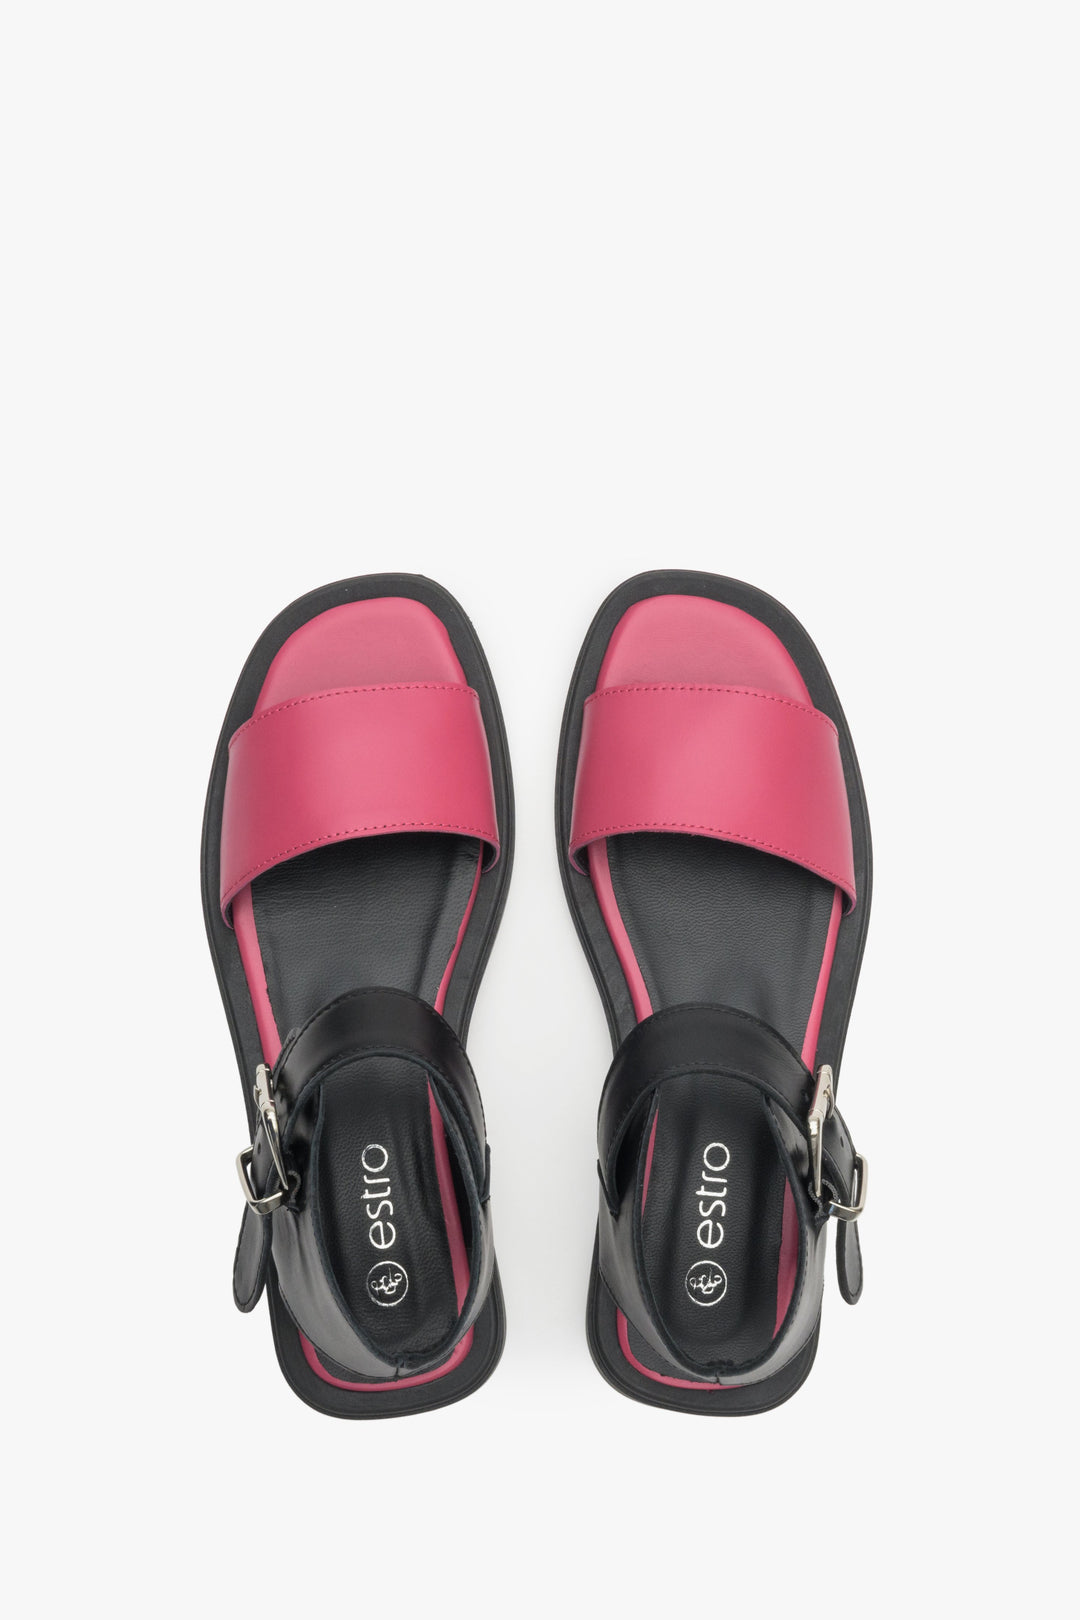 Soft sandals for women made of Italian natural leather in black and pink Estro: presentation of the model from above.